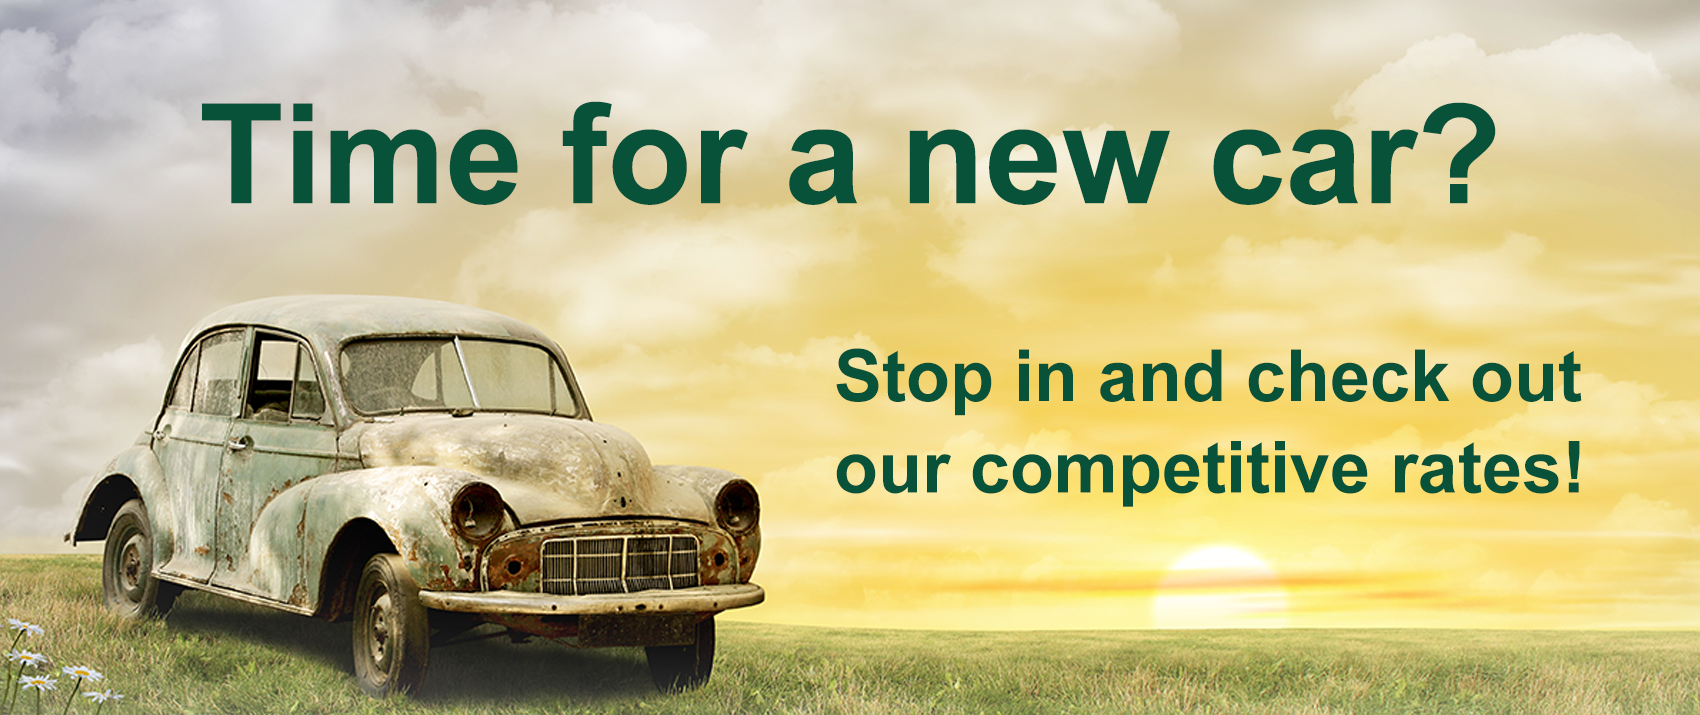 Time  for a new car? Stop in and check out our competitive rates.